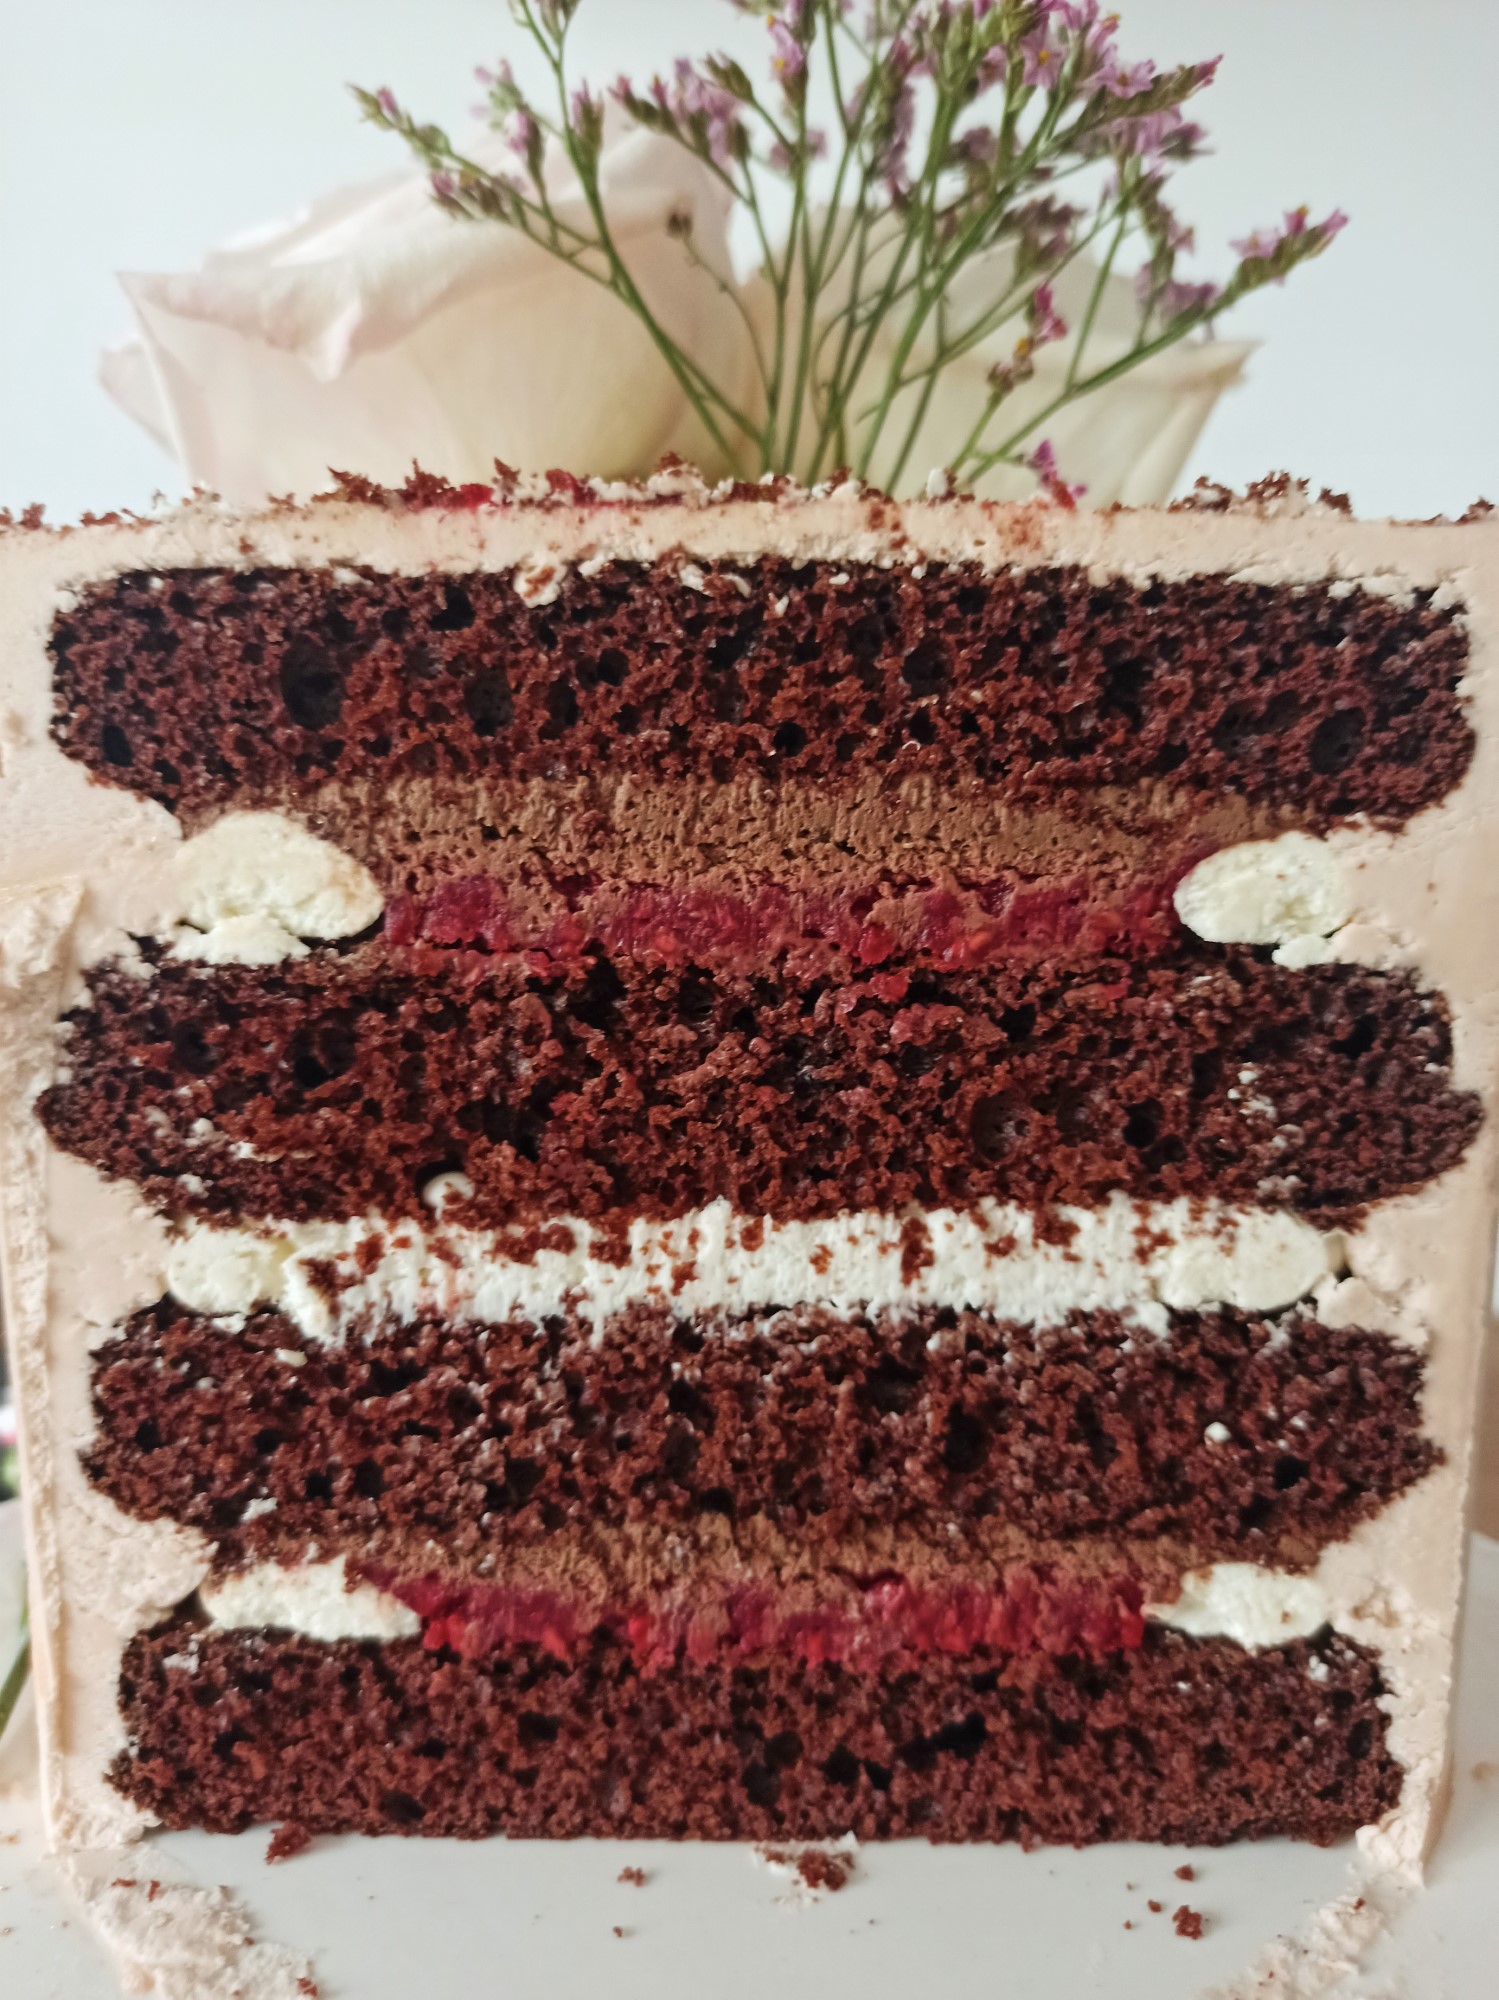 Cake with chocolate mousse and raspberry filling - alt